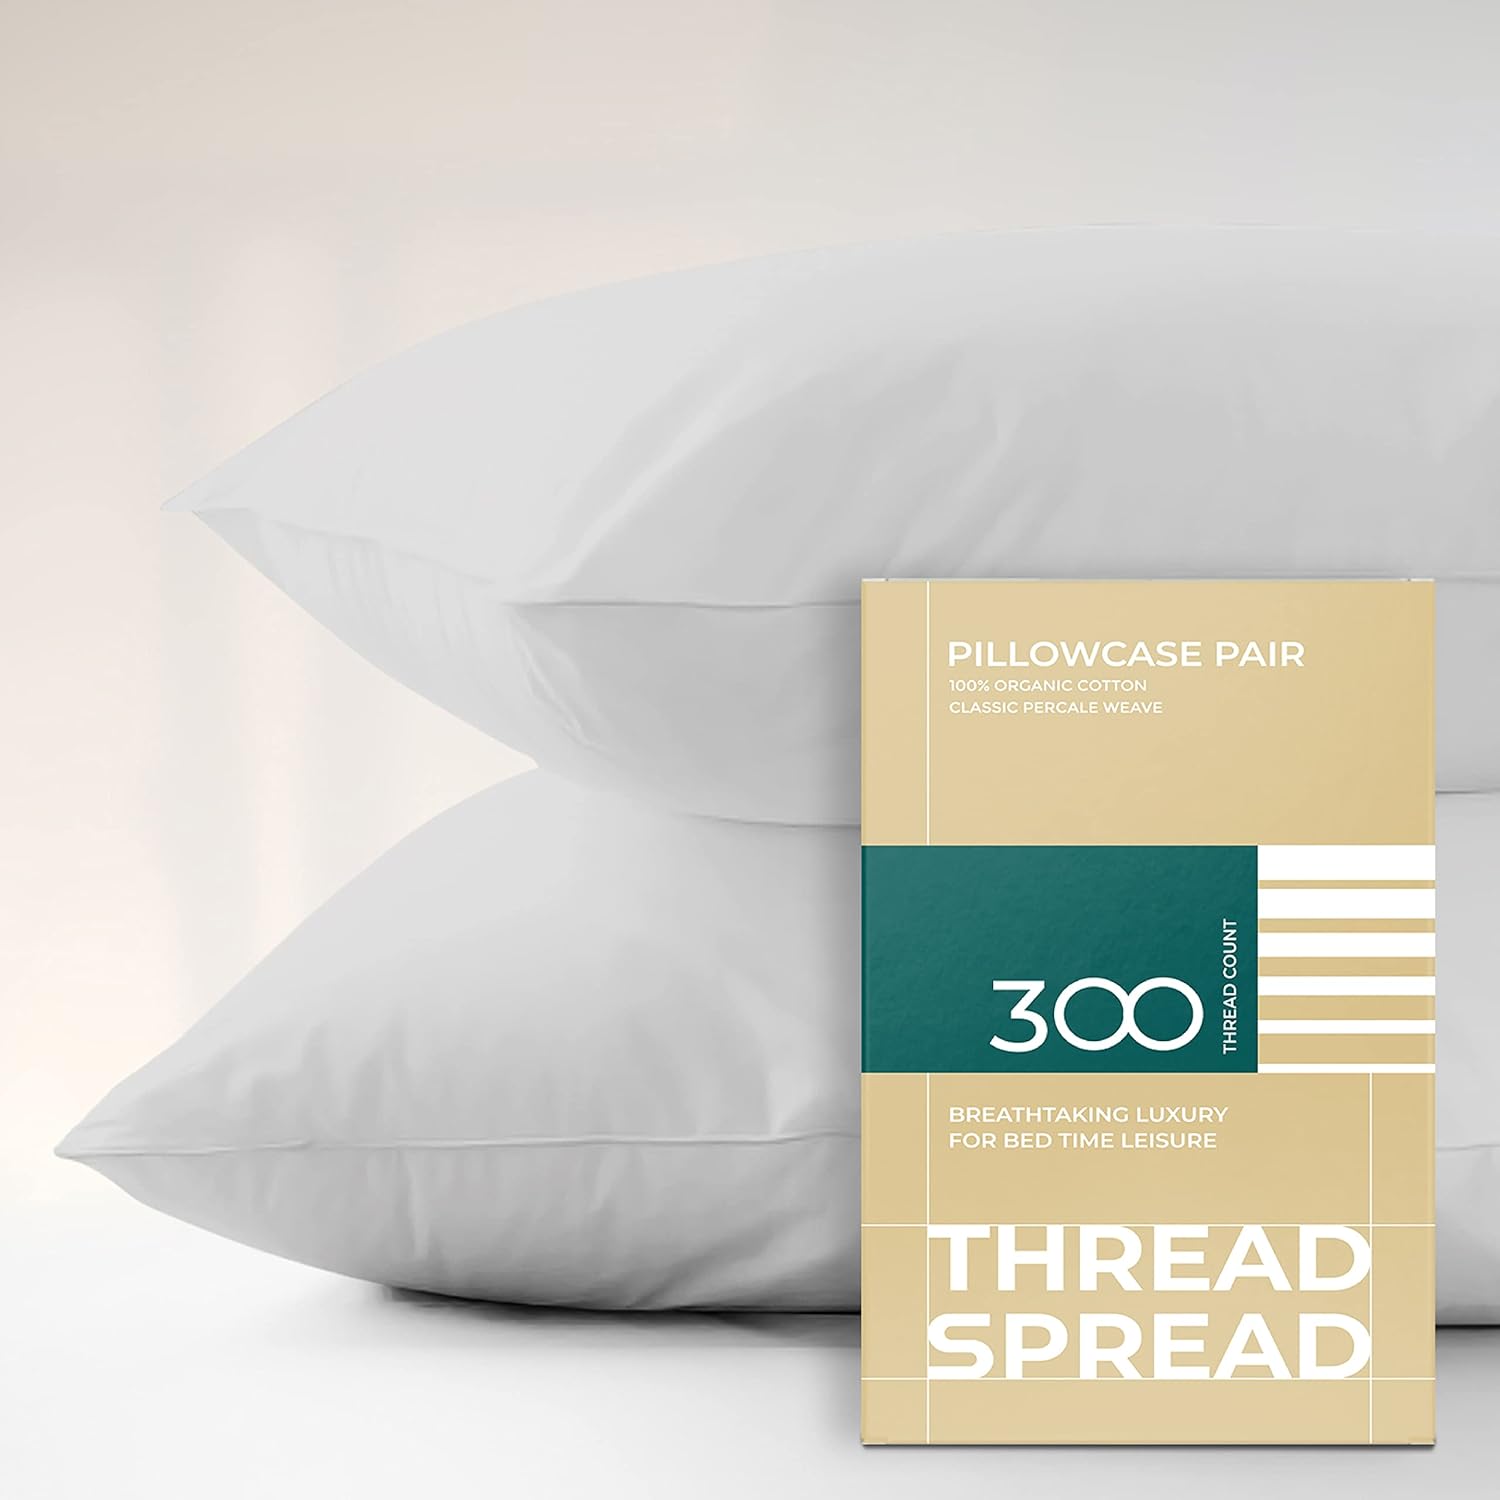 THREAD SPREAD 100% Organic Cotton Pillowcases - Soft and Crisp, Cooling Percale Weave, Breathable Pillow Covers, Set of 2 (King Size, Light Gray)